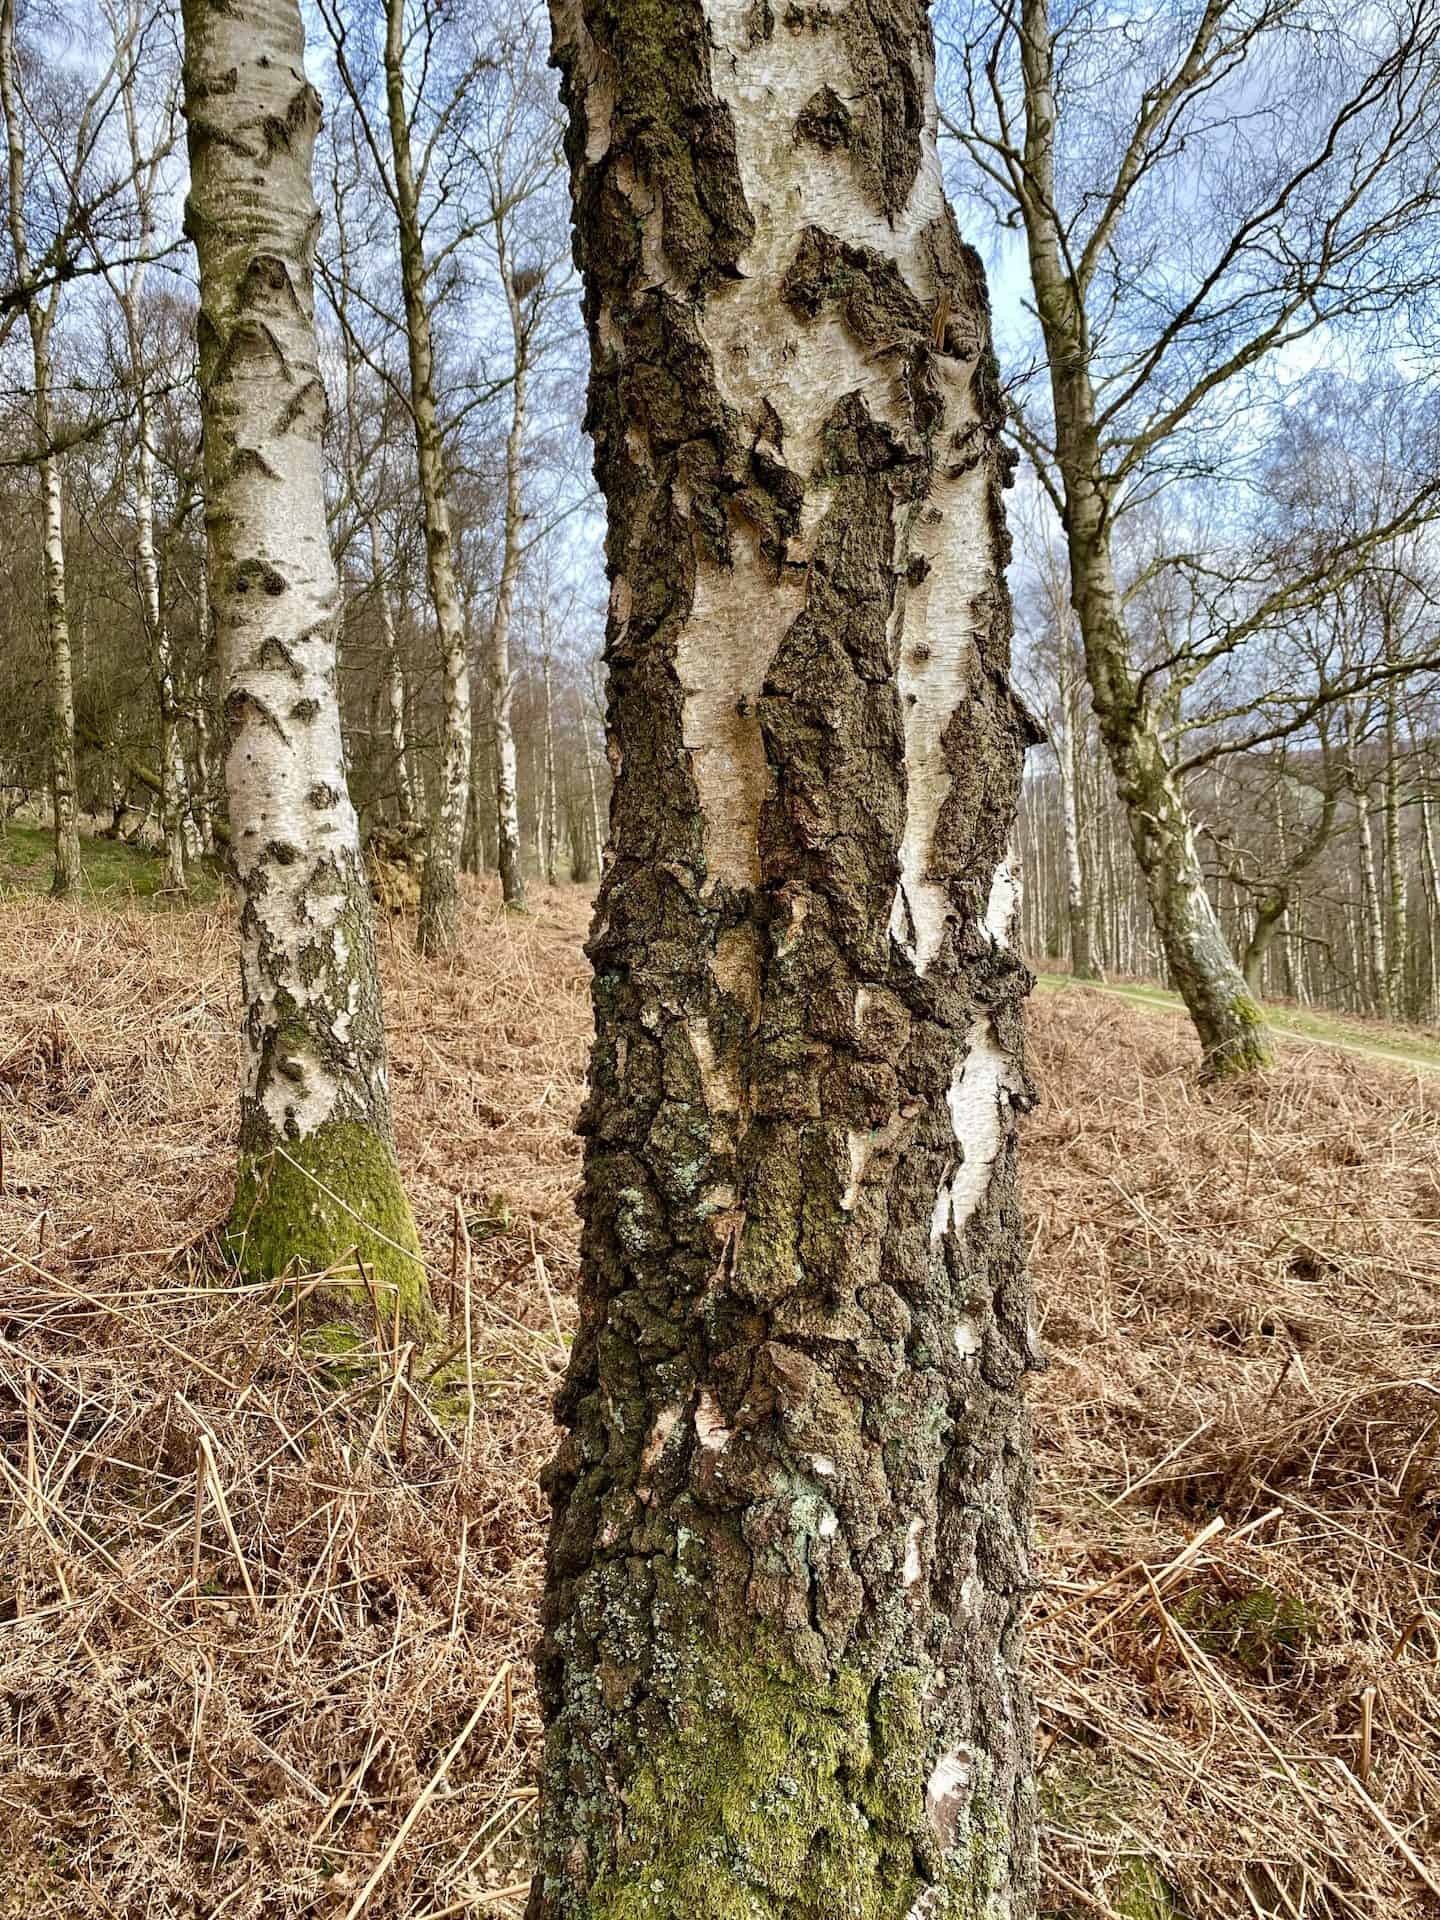 The silvery-white bark of the silver birch makes this tree one of the easiest to put a name to in winter when there are no leaves to help with the identification process. In older trees, the bark is thick and deeply fissured at the base, whilst higher up it is smooth and often develops a pattern of black diamond shapes.